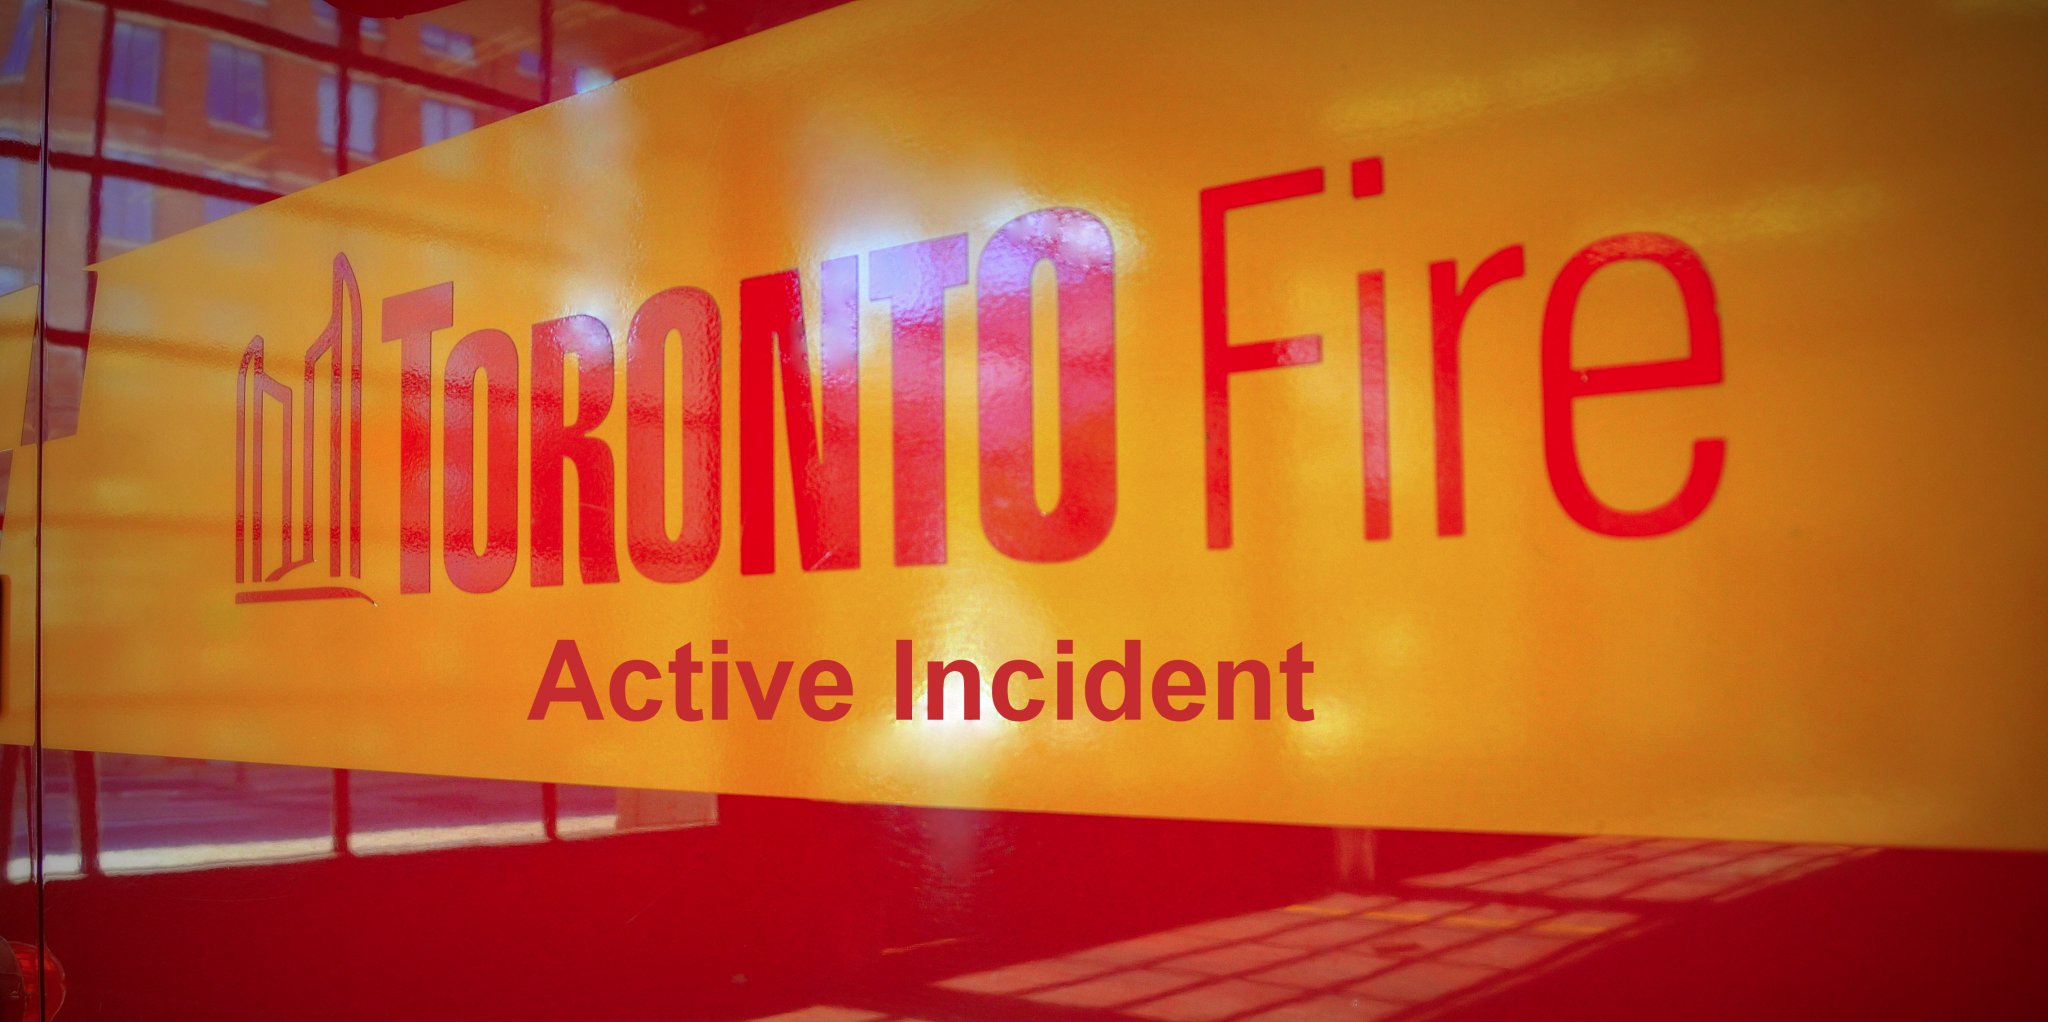 Toronto Fire Active Incident Sign